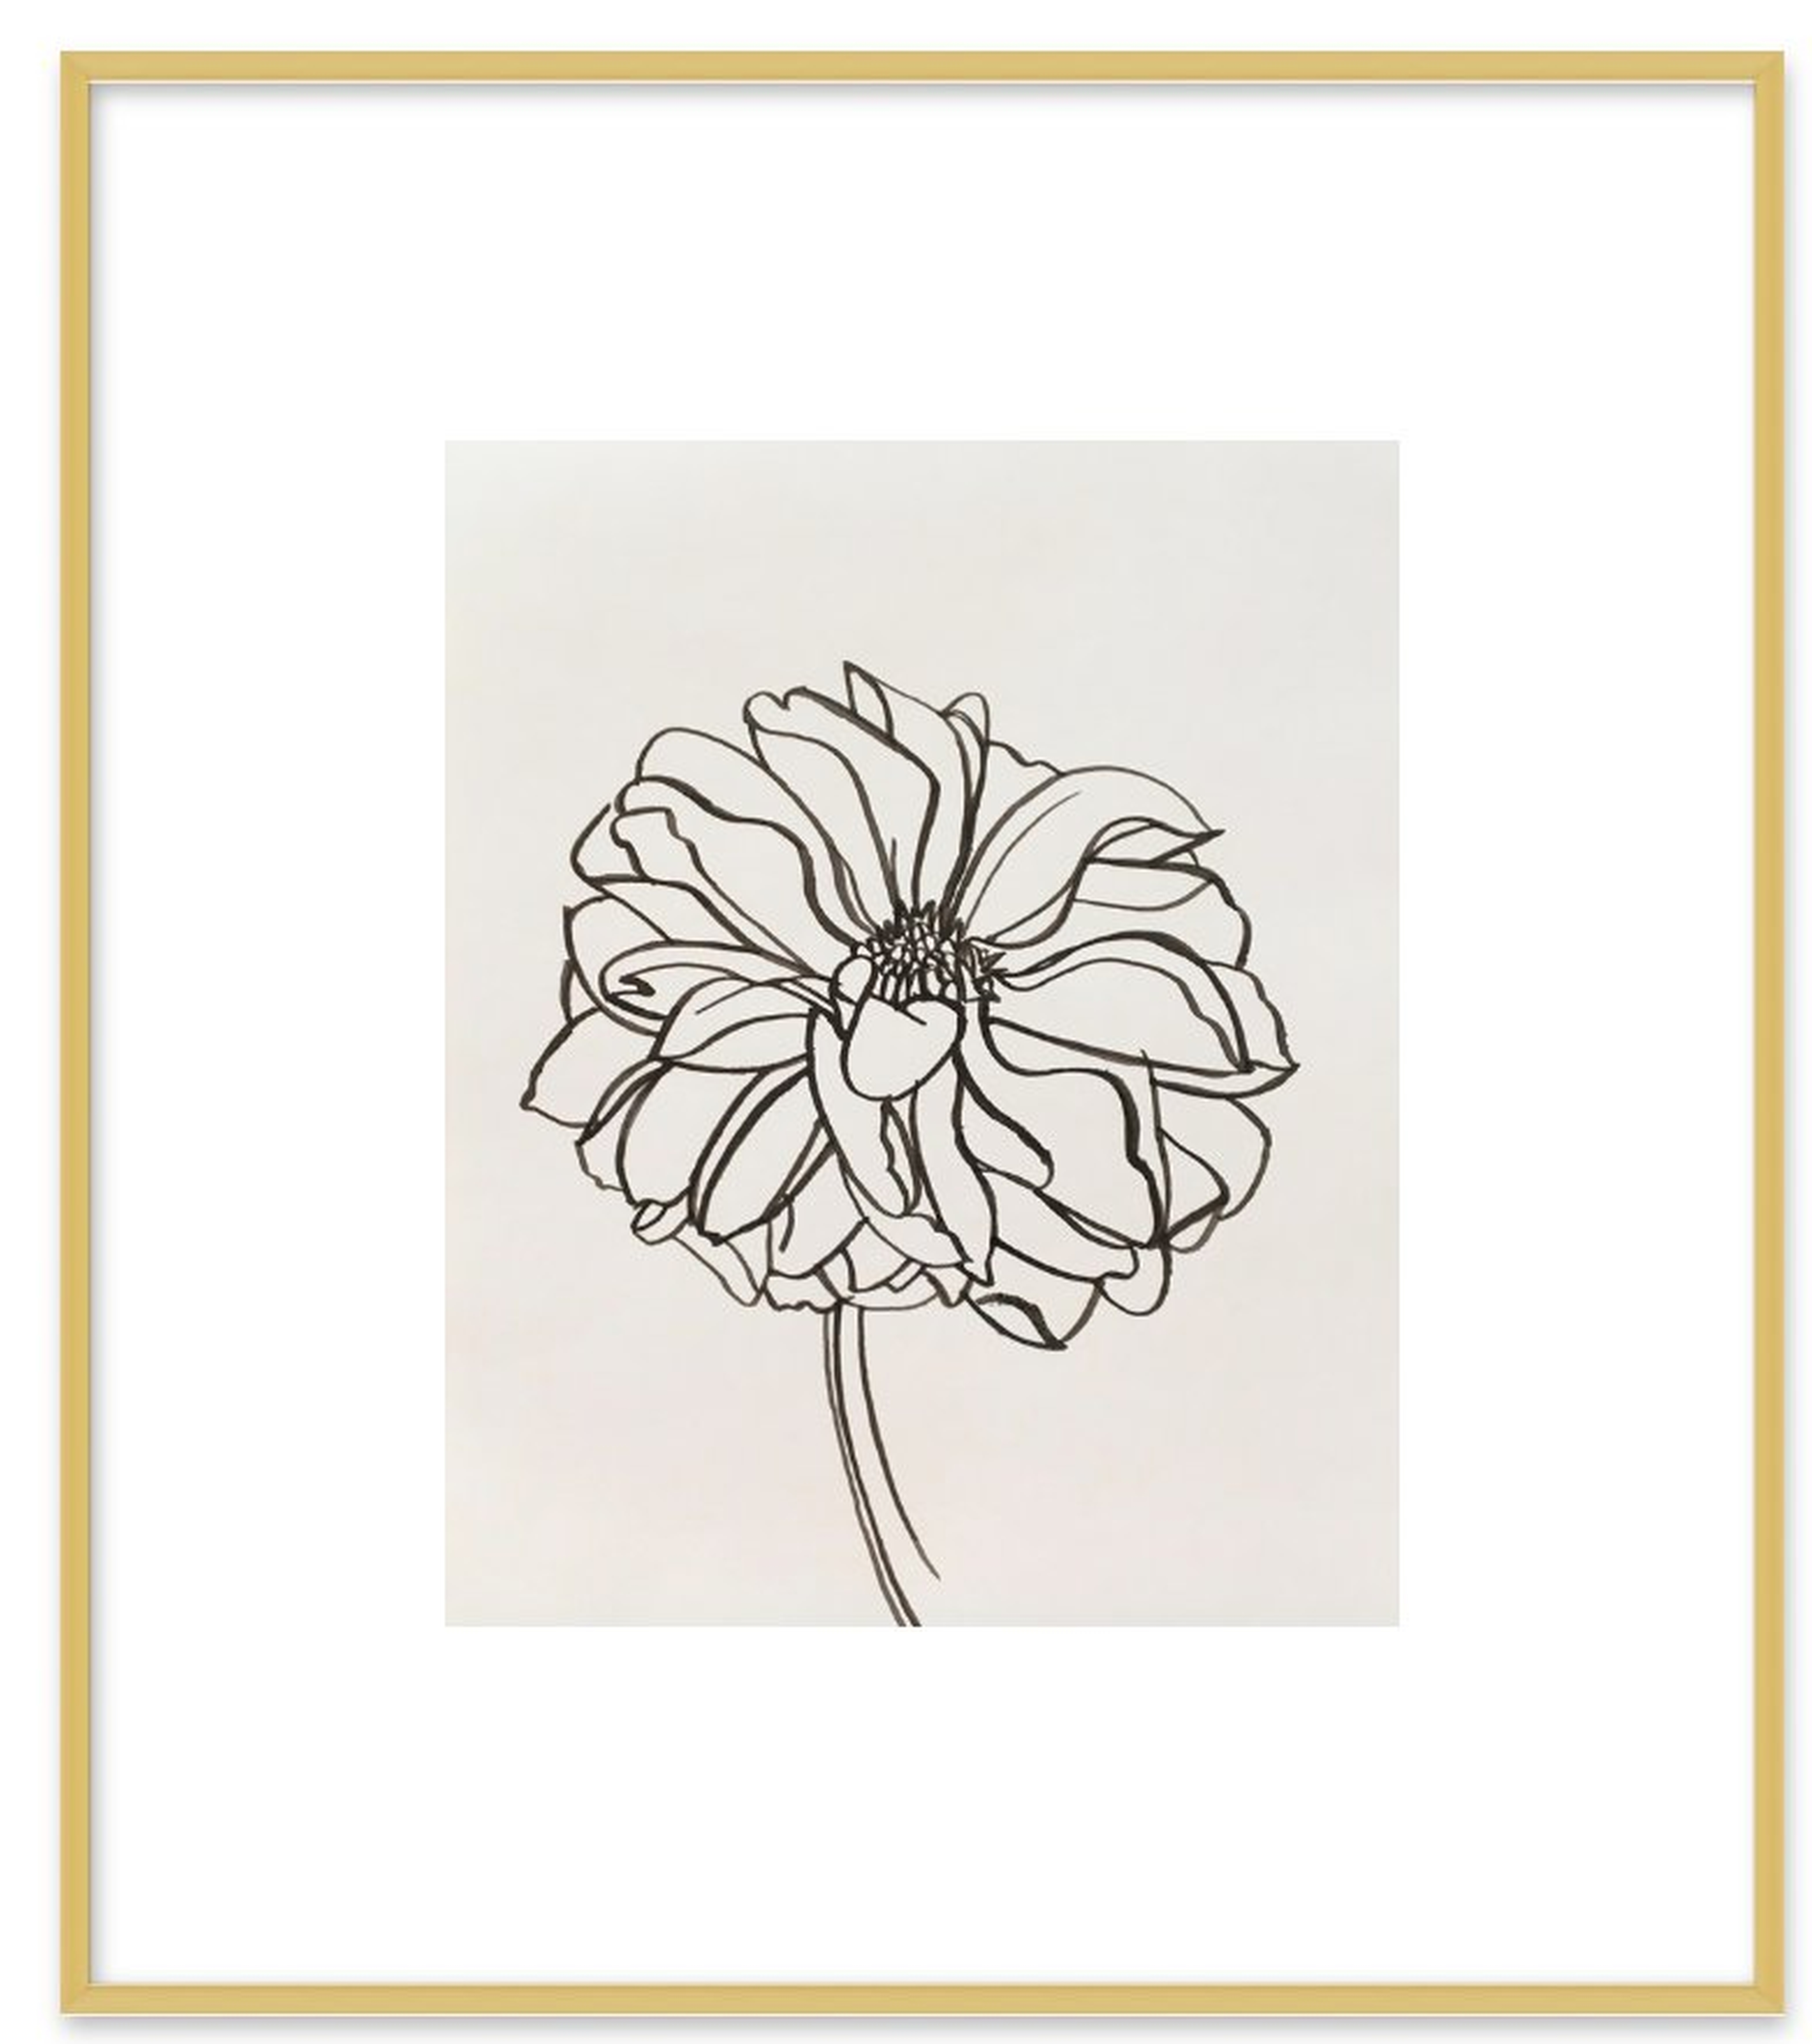 Dahlia - 14x16" - Frosted Gold Metal Frame with Matte - Artfully Walls